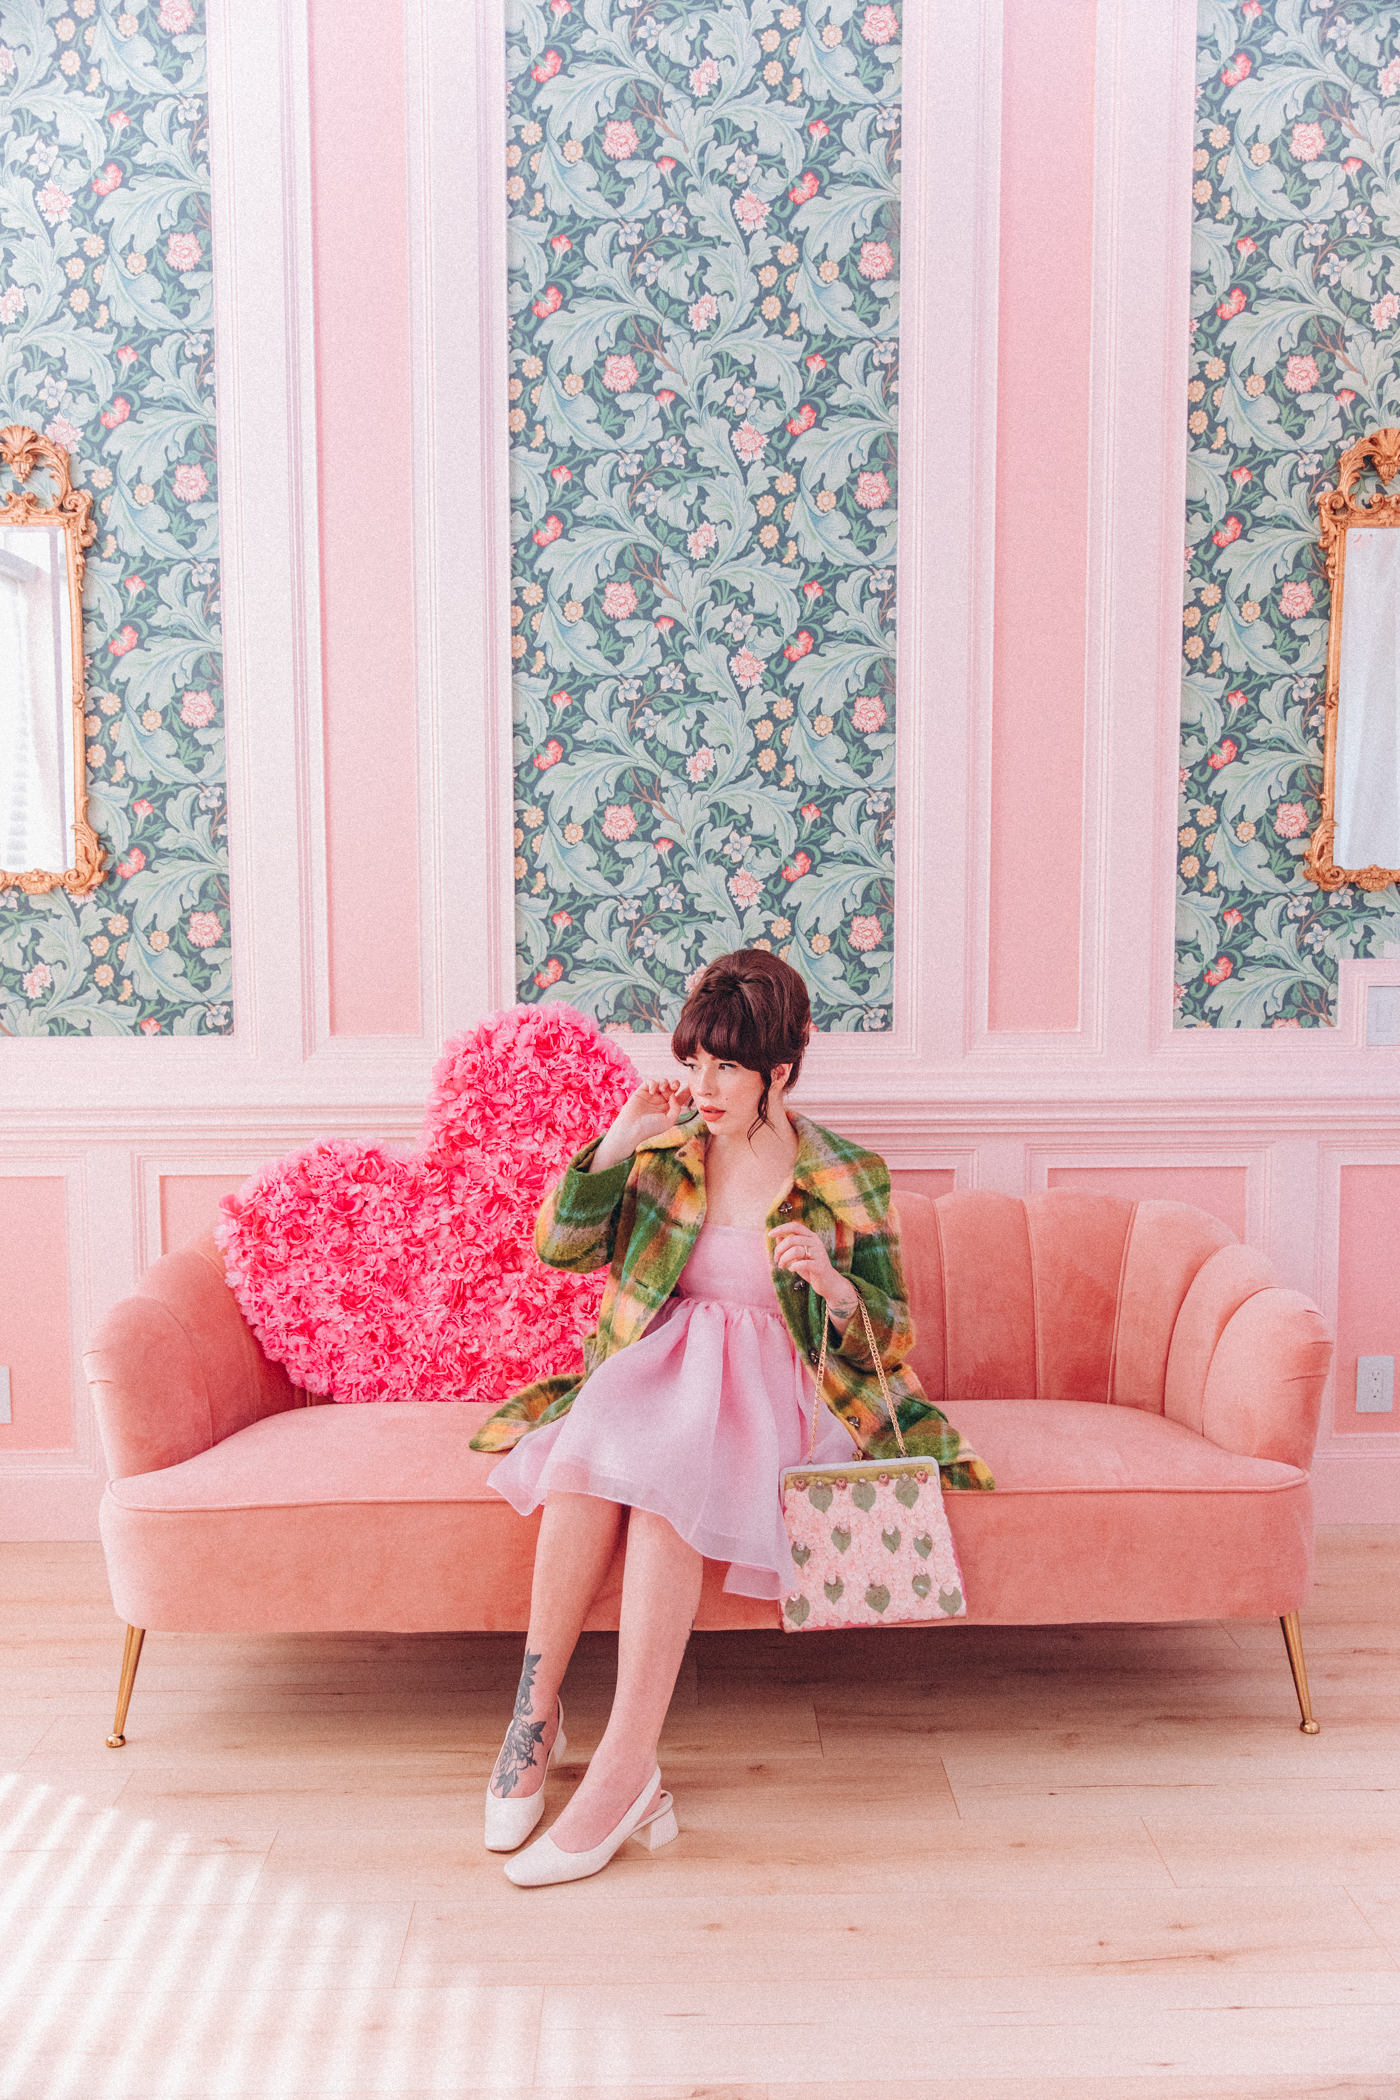 woman sitting on a pink couch and wearing coat and dress with her most worn shoes